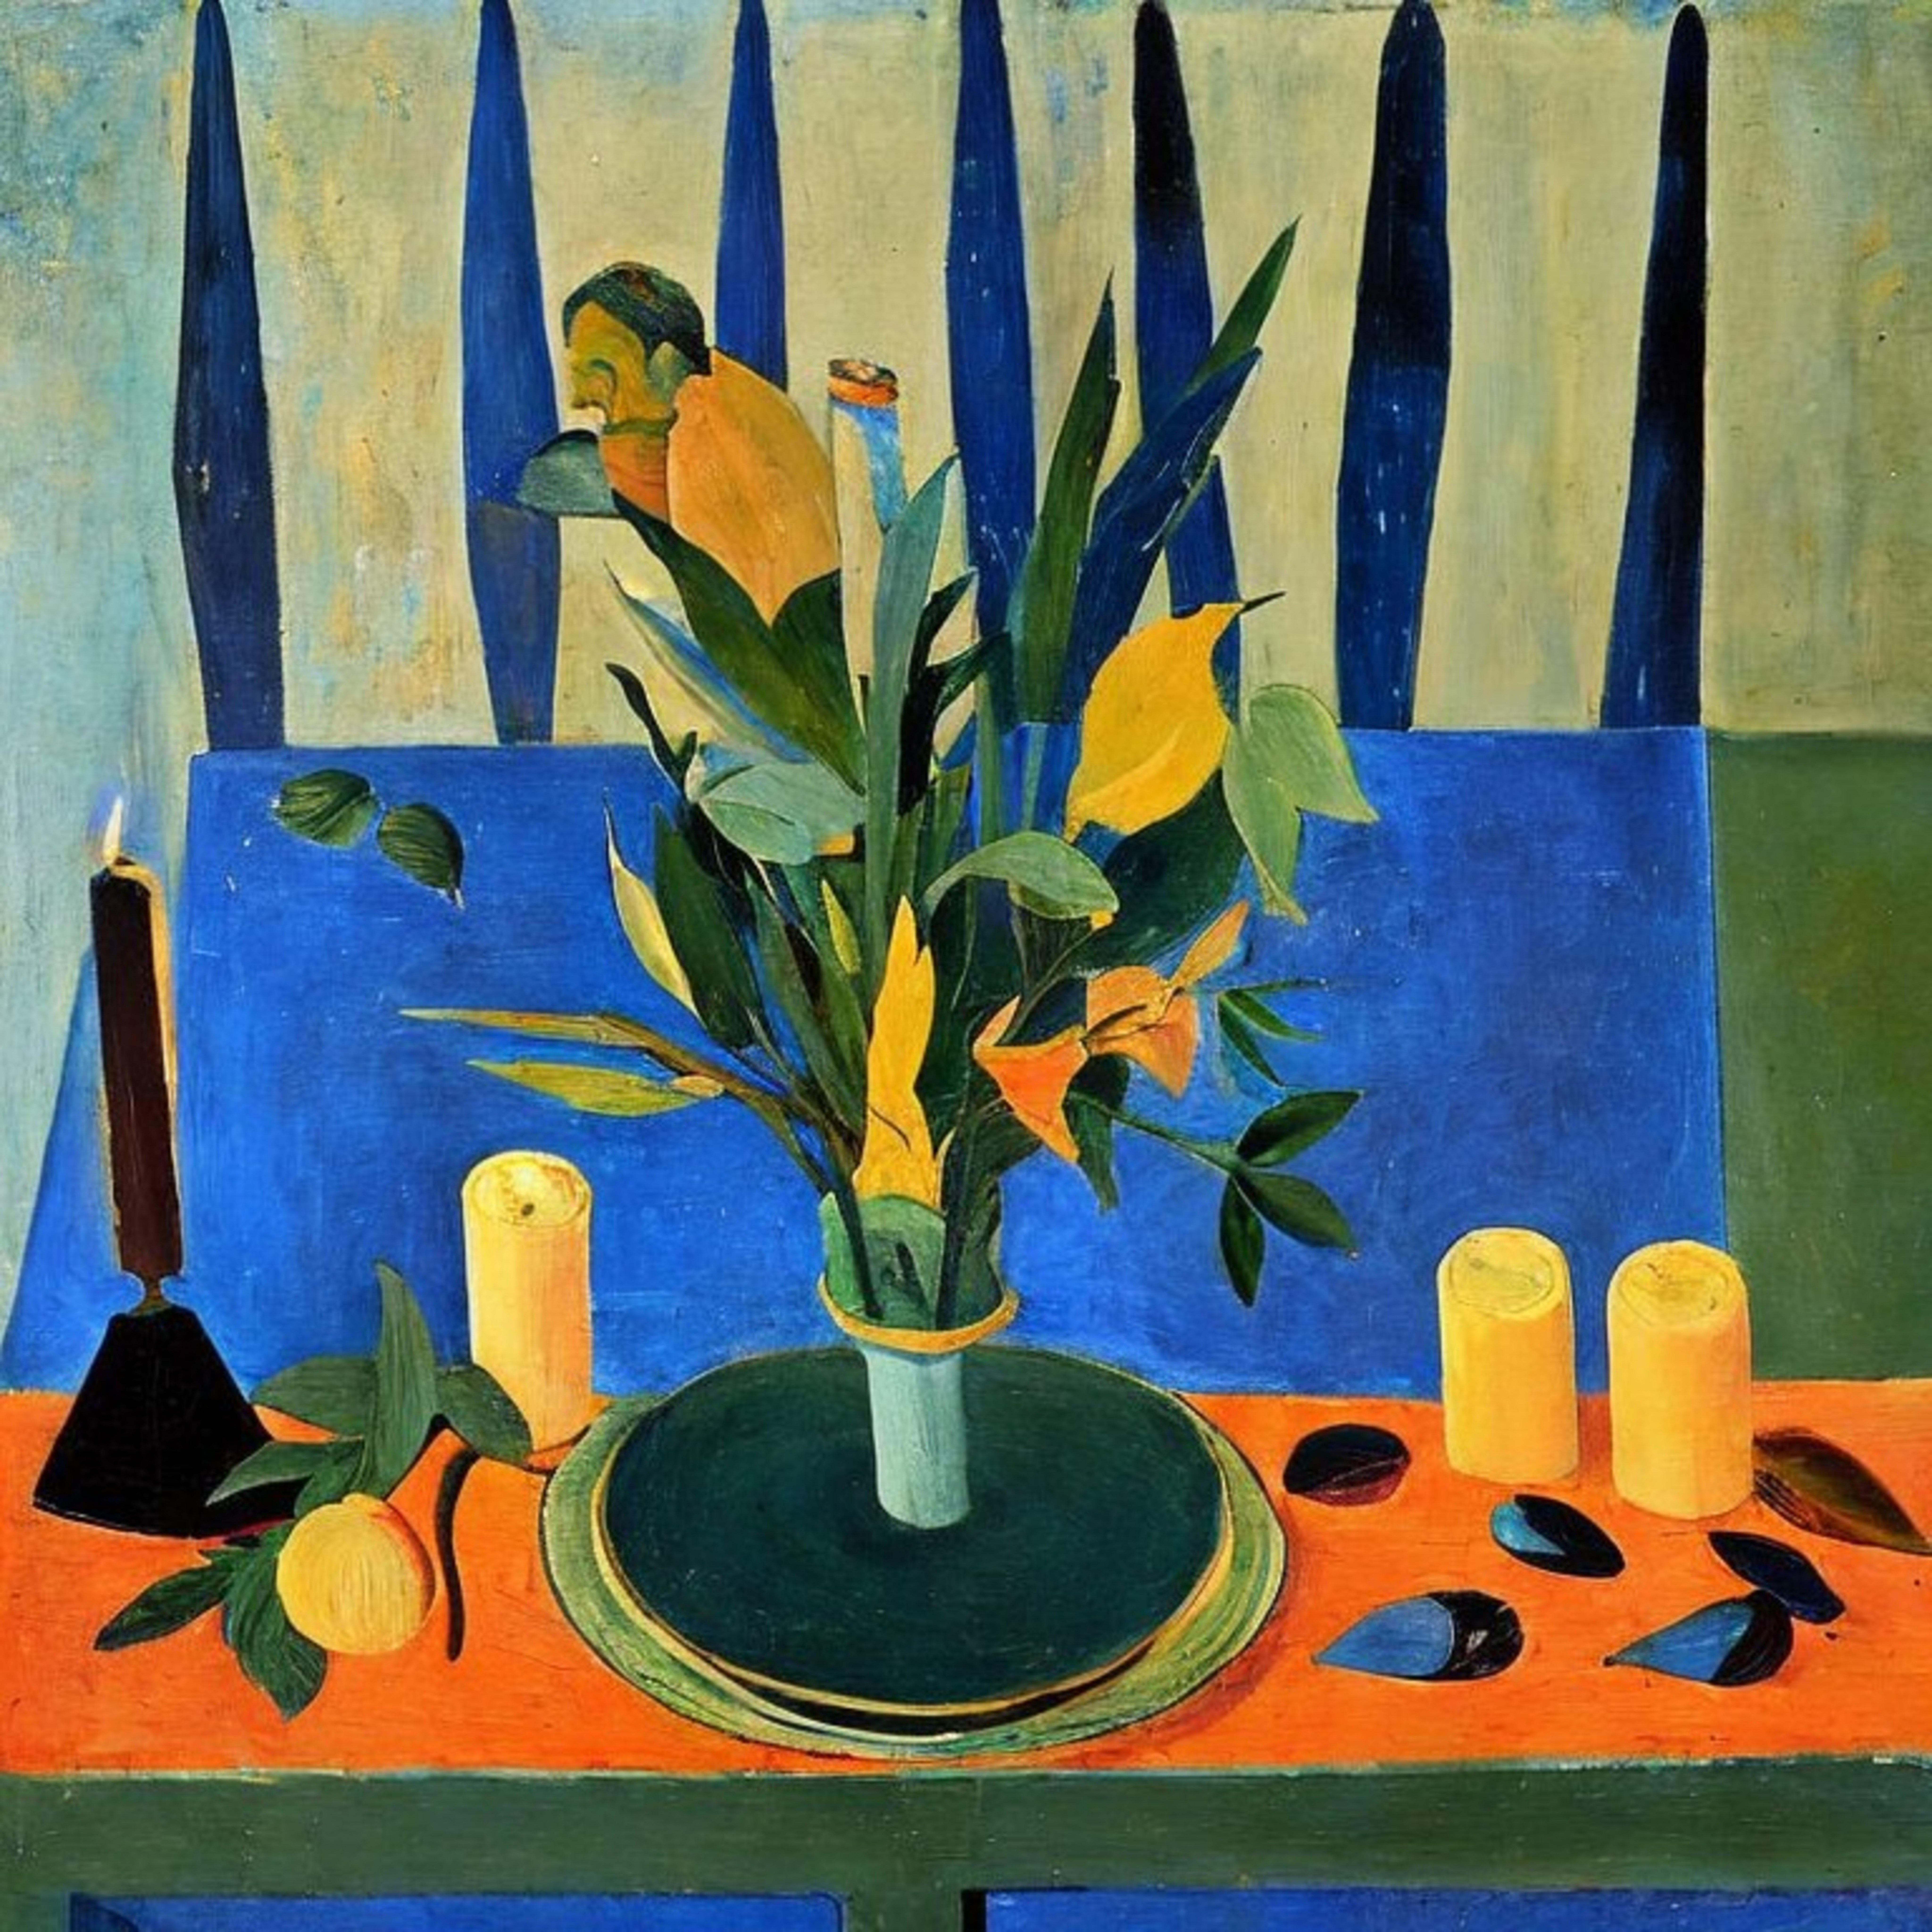 Blue series "Still life with candles" , 70x70cm, print on canvas